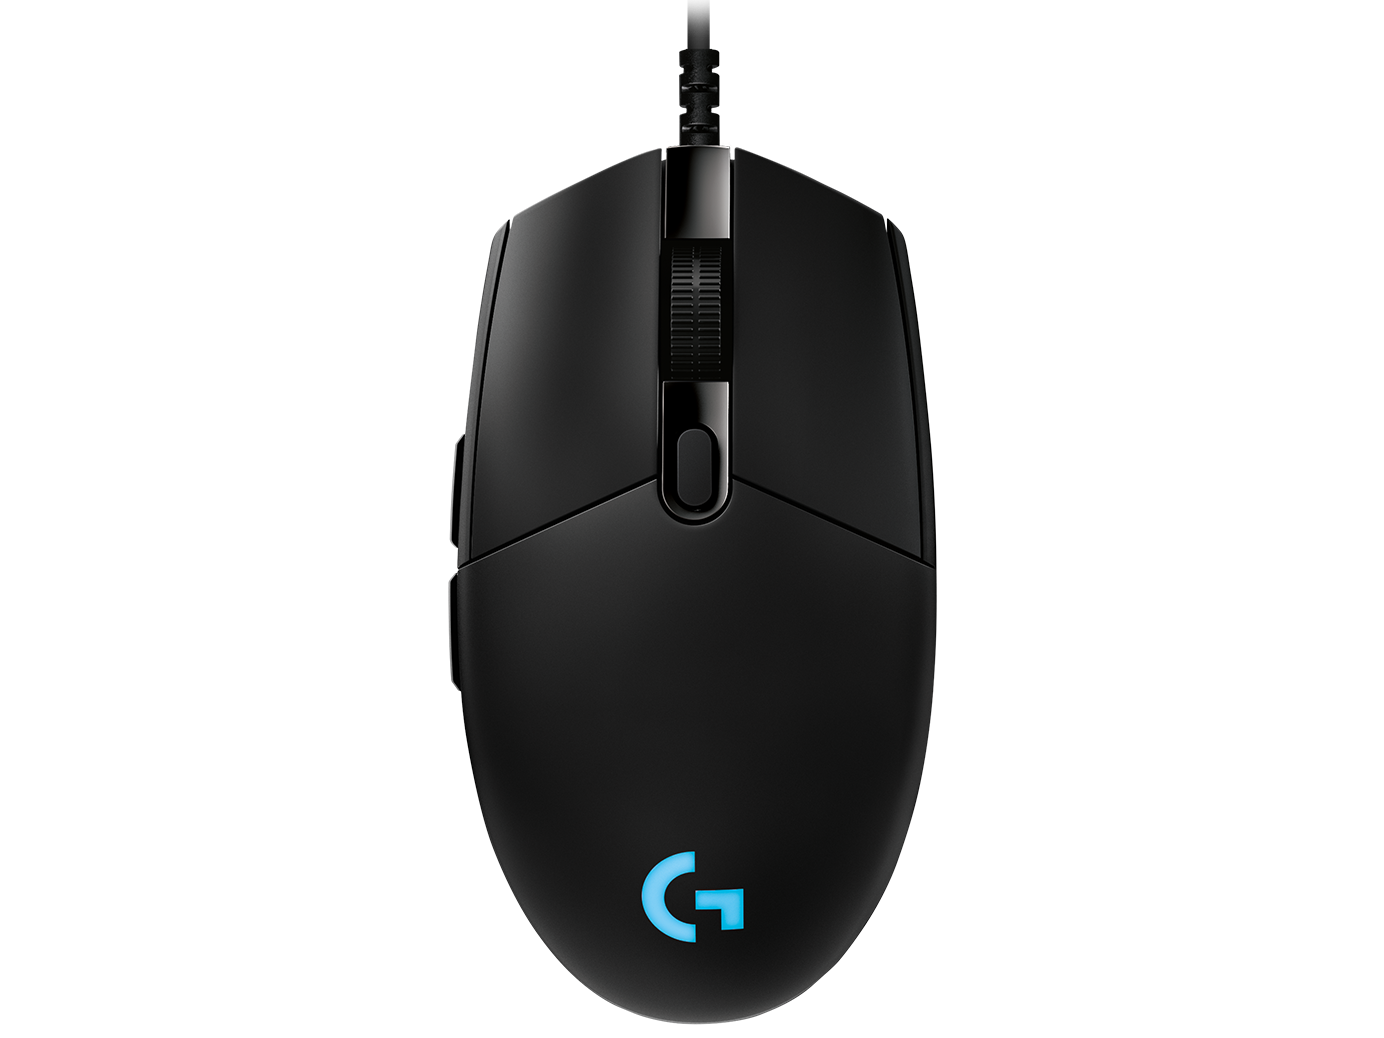 Logitech G Pro Gaming Mouse With Hero 16k Sensor For Esports